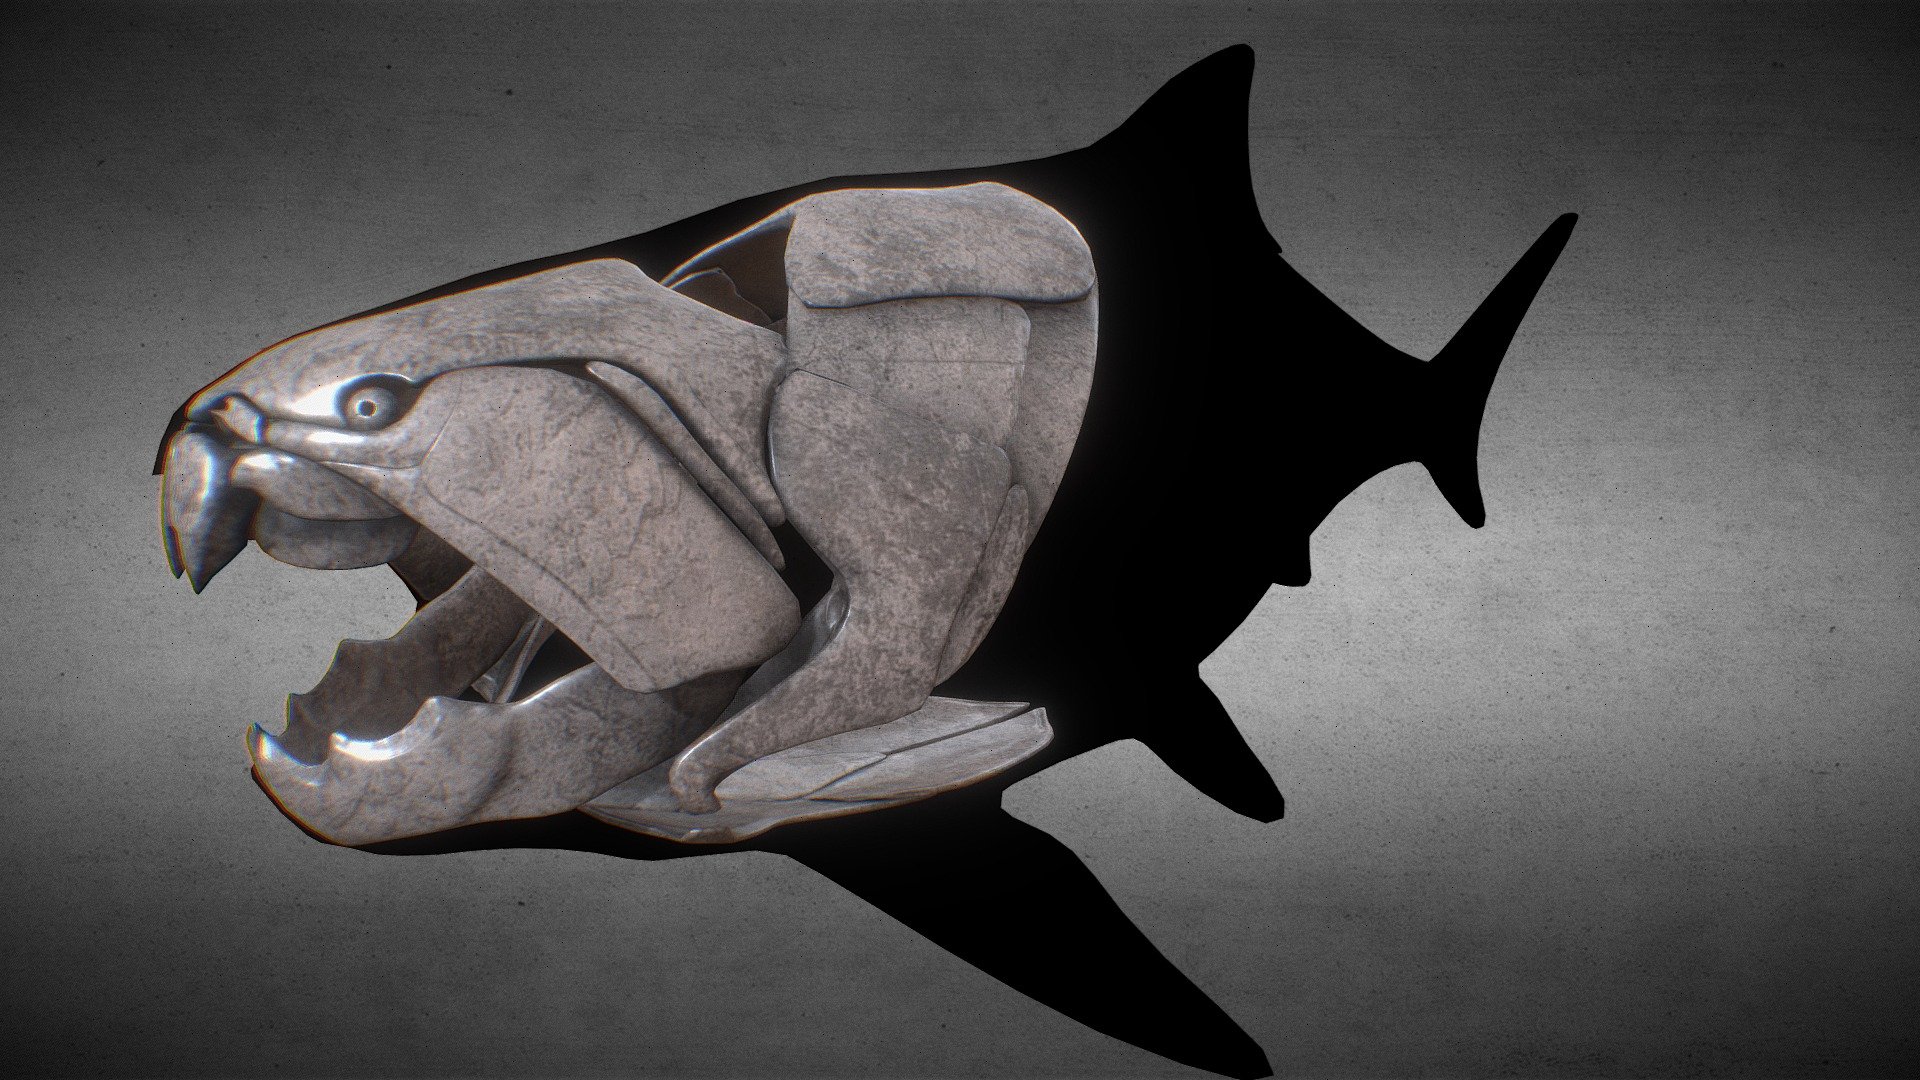 Reconstruction of Dunkleosteus with full body shown in silhouette. It was recently found that Dunkleosteus was likely much shorter than previously thought. 

Reconstruction mostly based on CMNH 5768 3d model